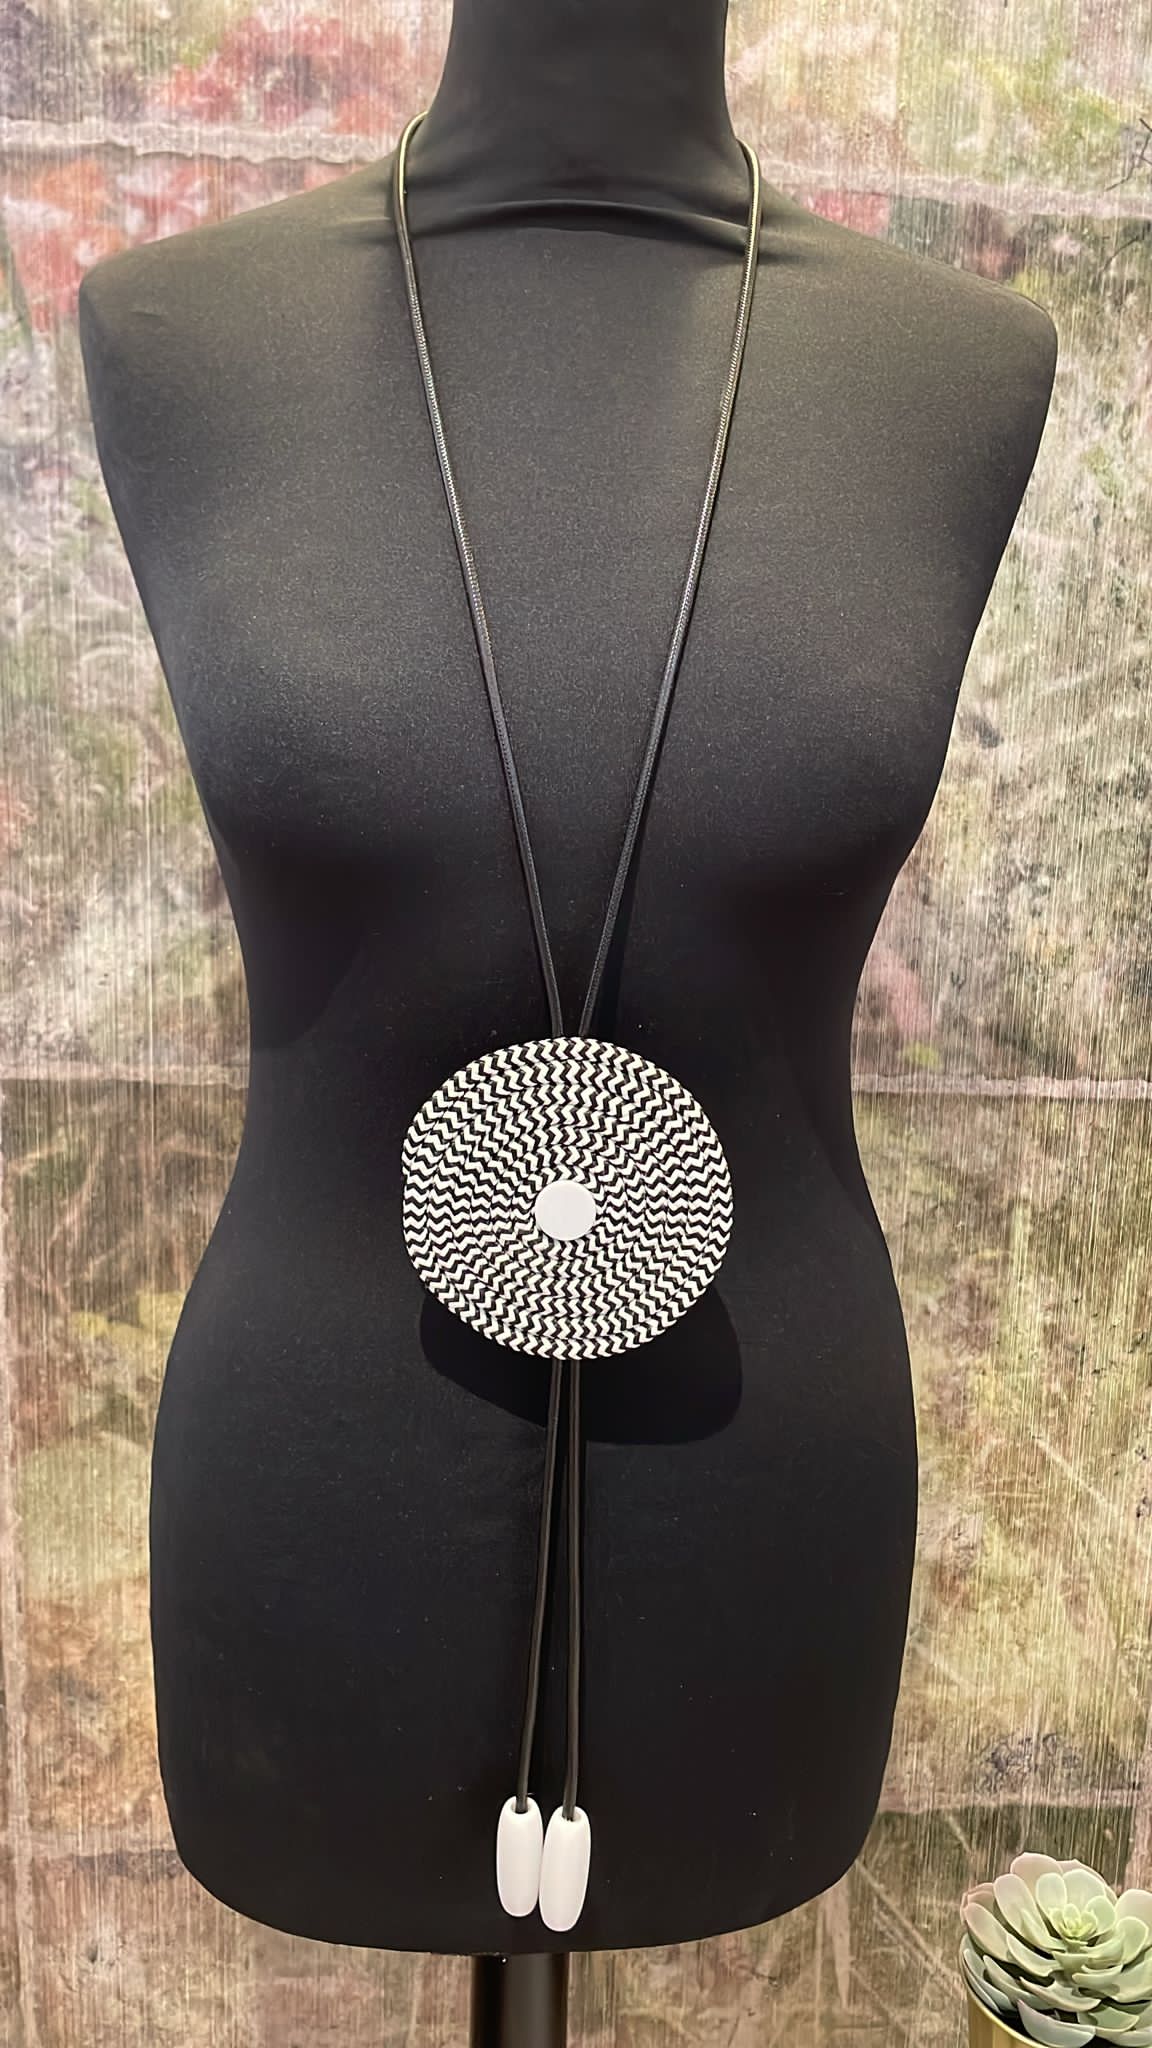 Spiral Necklace with Toggle in Black/White